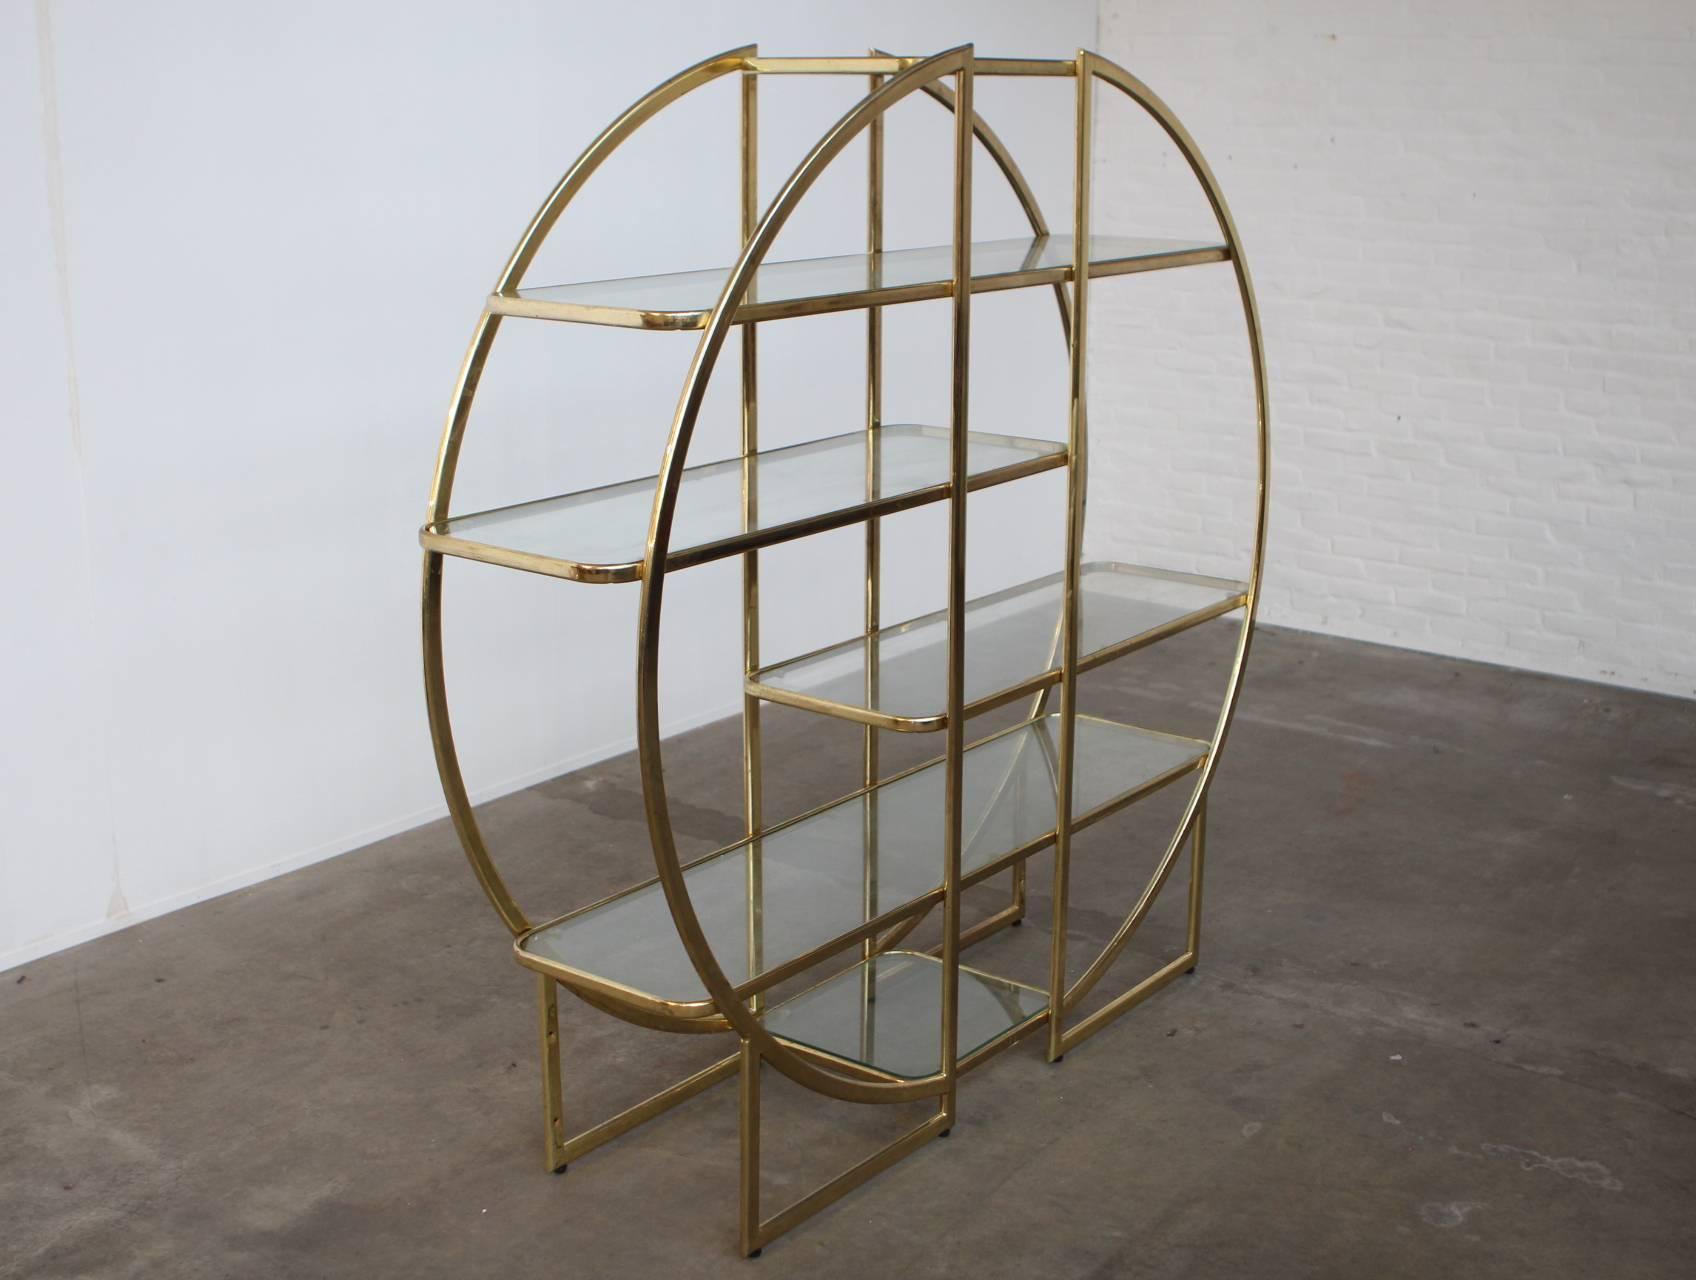 Amazing round étagère or vitrine or book case in the manner of Milo Baughman with six various sized glass shelving. This piece can be put against the wall but is also great to use as room divider. Great piece and a case example of Hollywood Regency